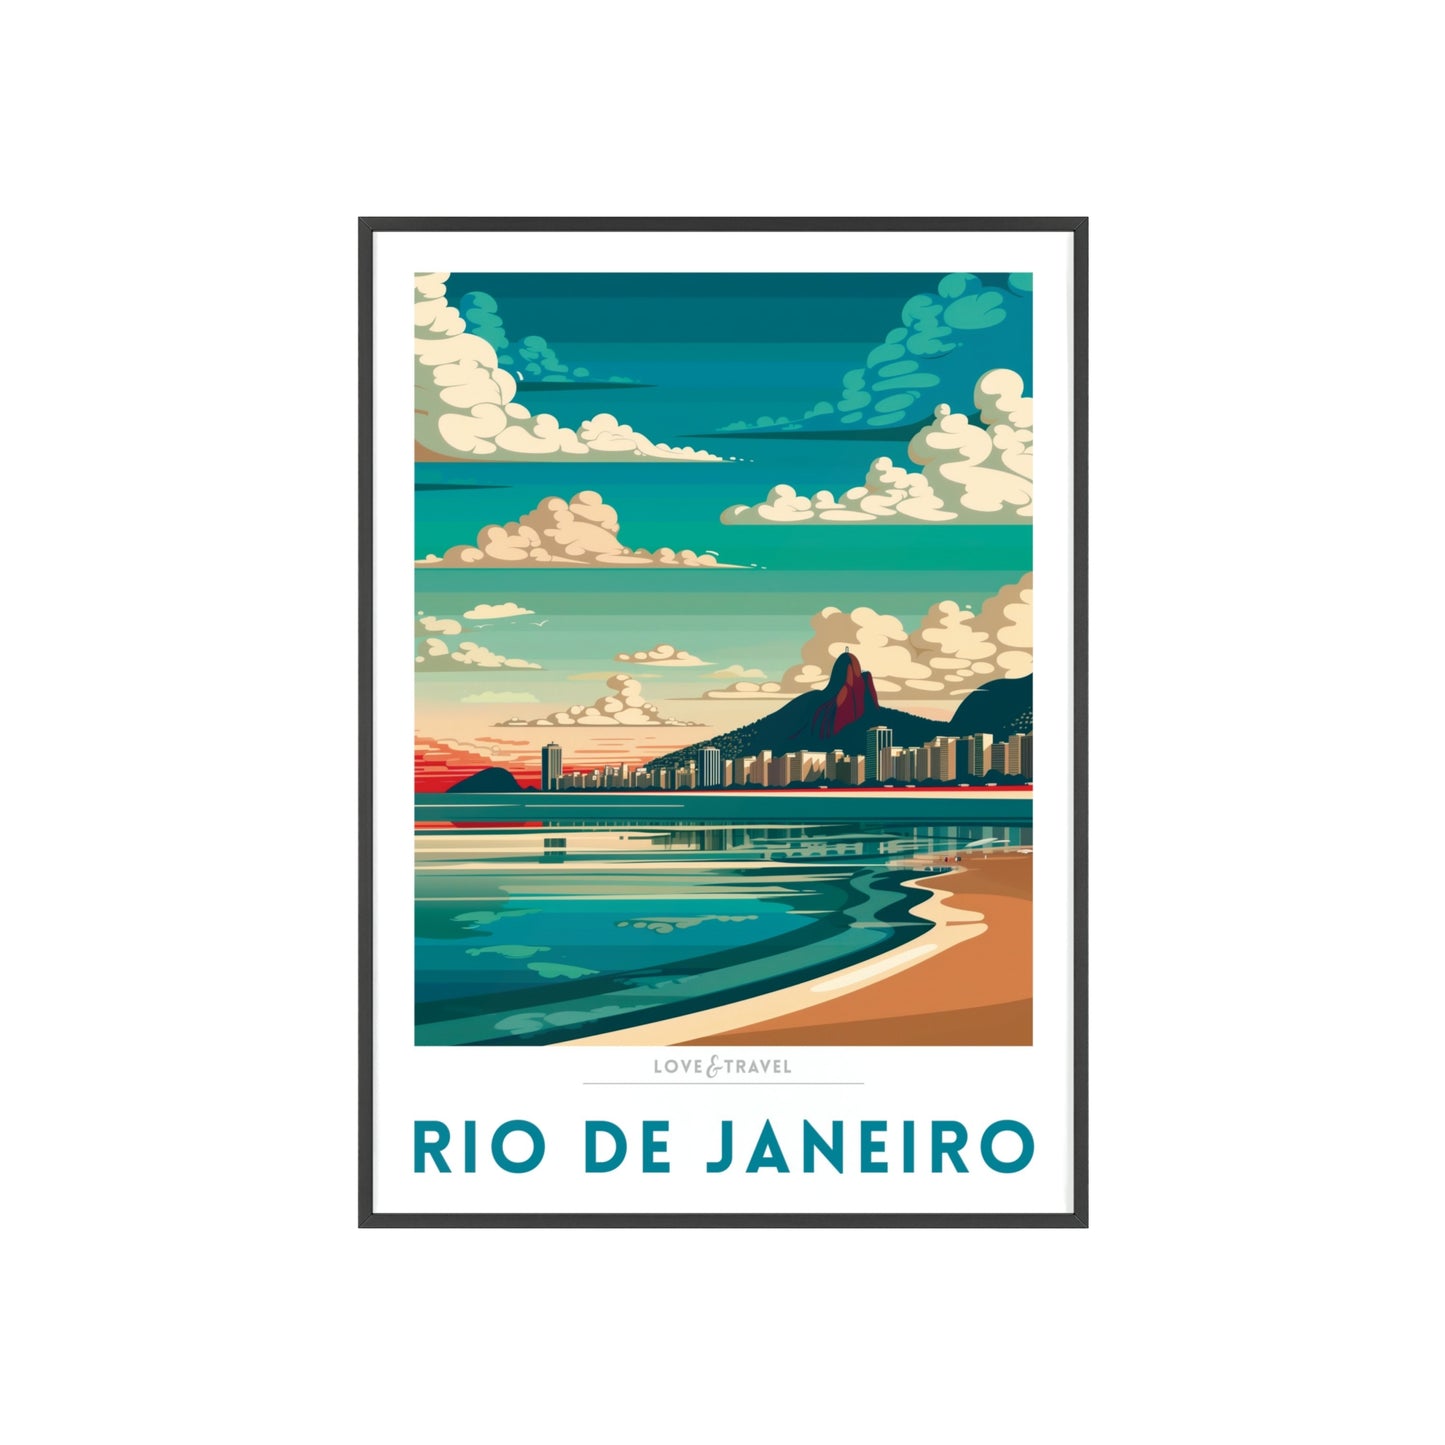 Travel poster of Rio de Janeiro featuring iconic landmarks like Ipanema Beach, capturing the vibrant spirit and beauty of the city.